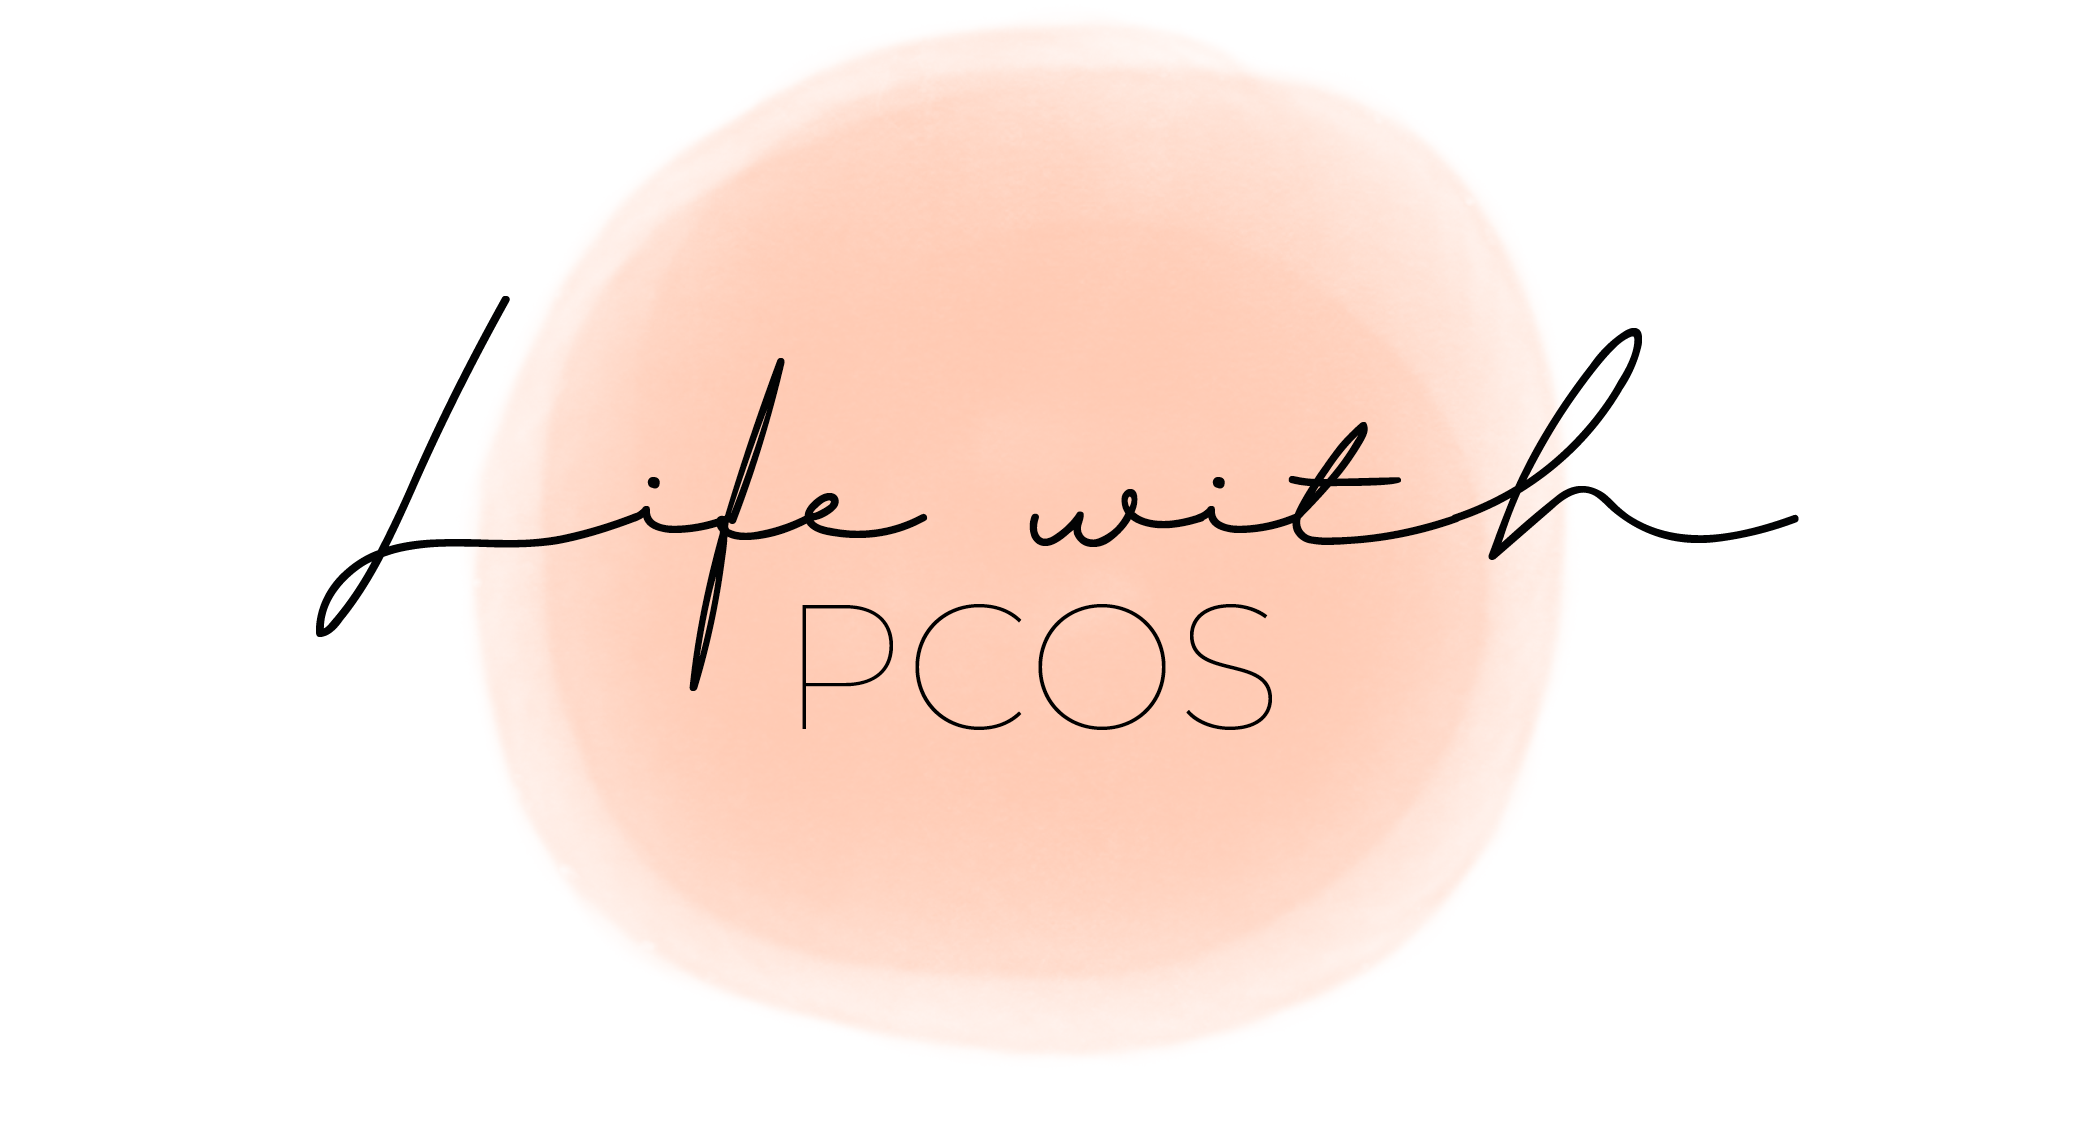 Life with PCOS